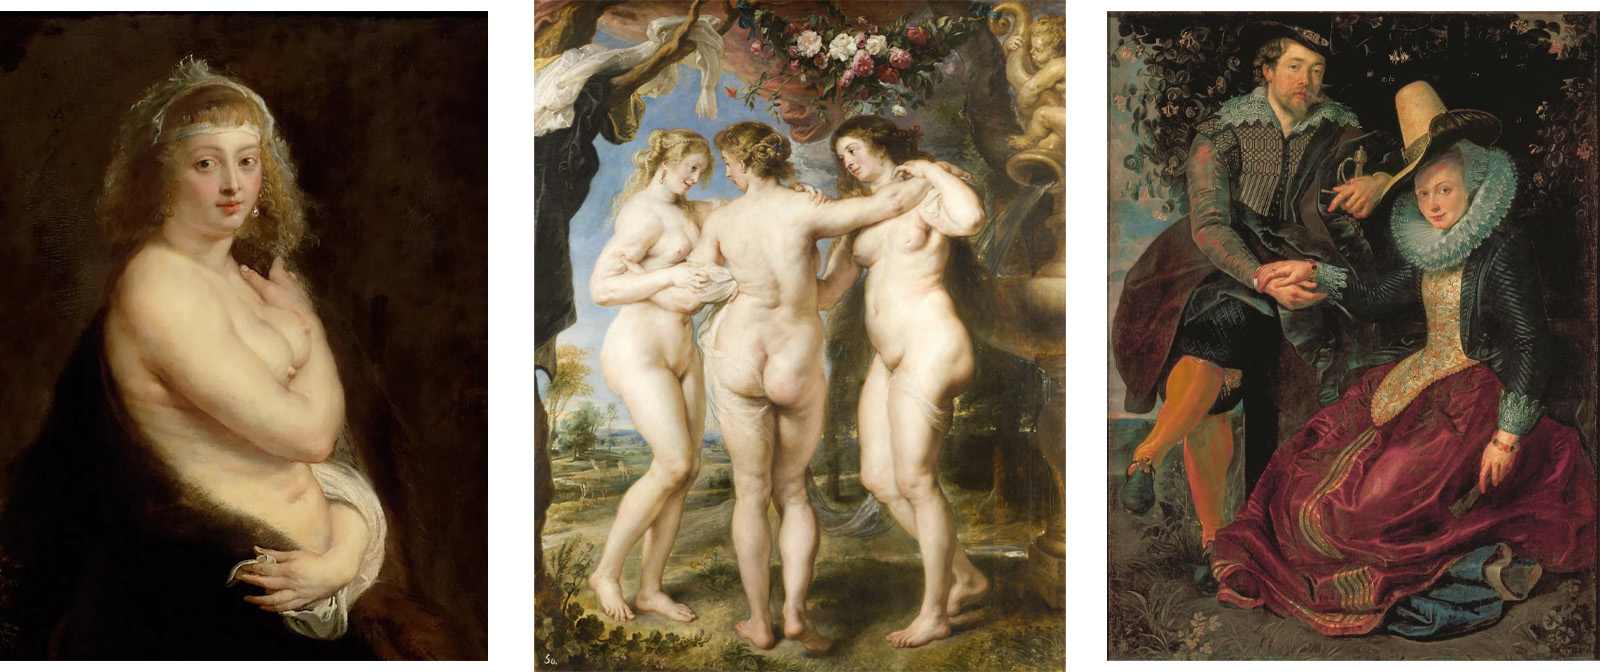 If a painting shows full naked women doing who knows what - it's not vulgarity, it's Rubens! About the famous painter.